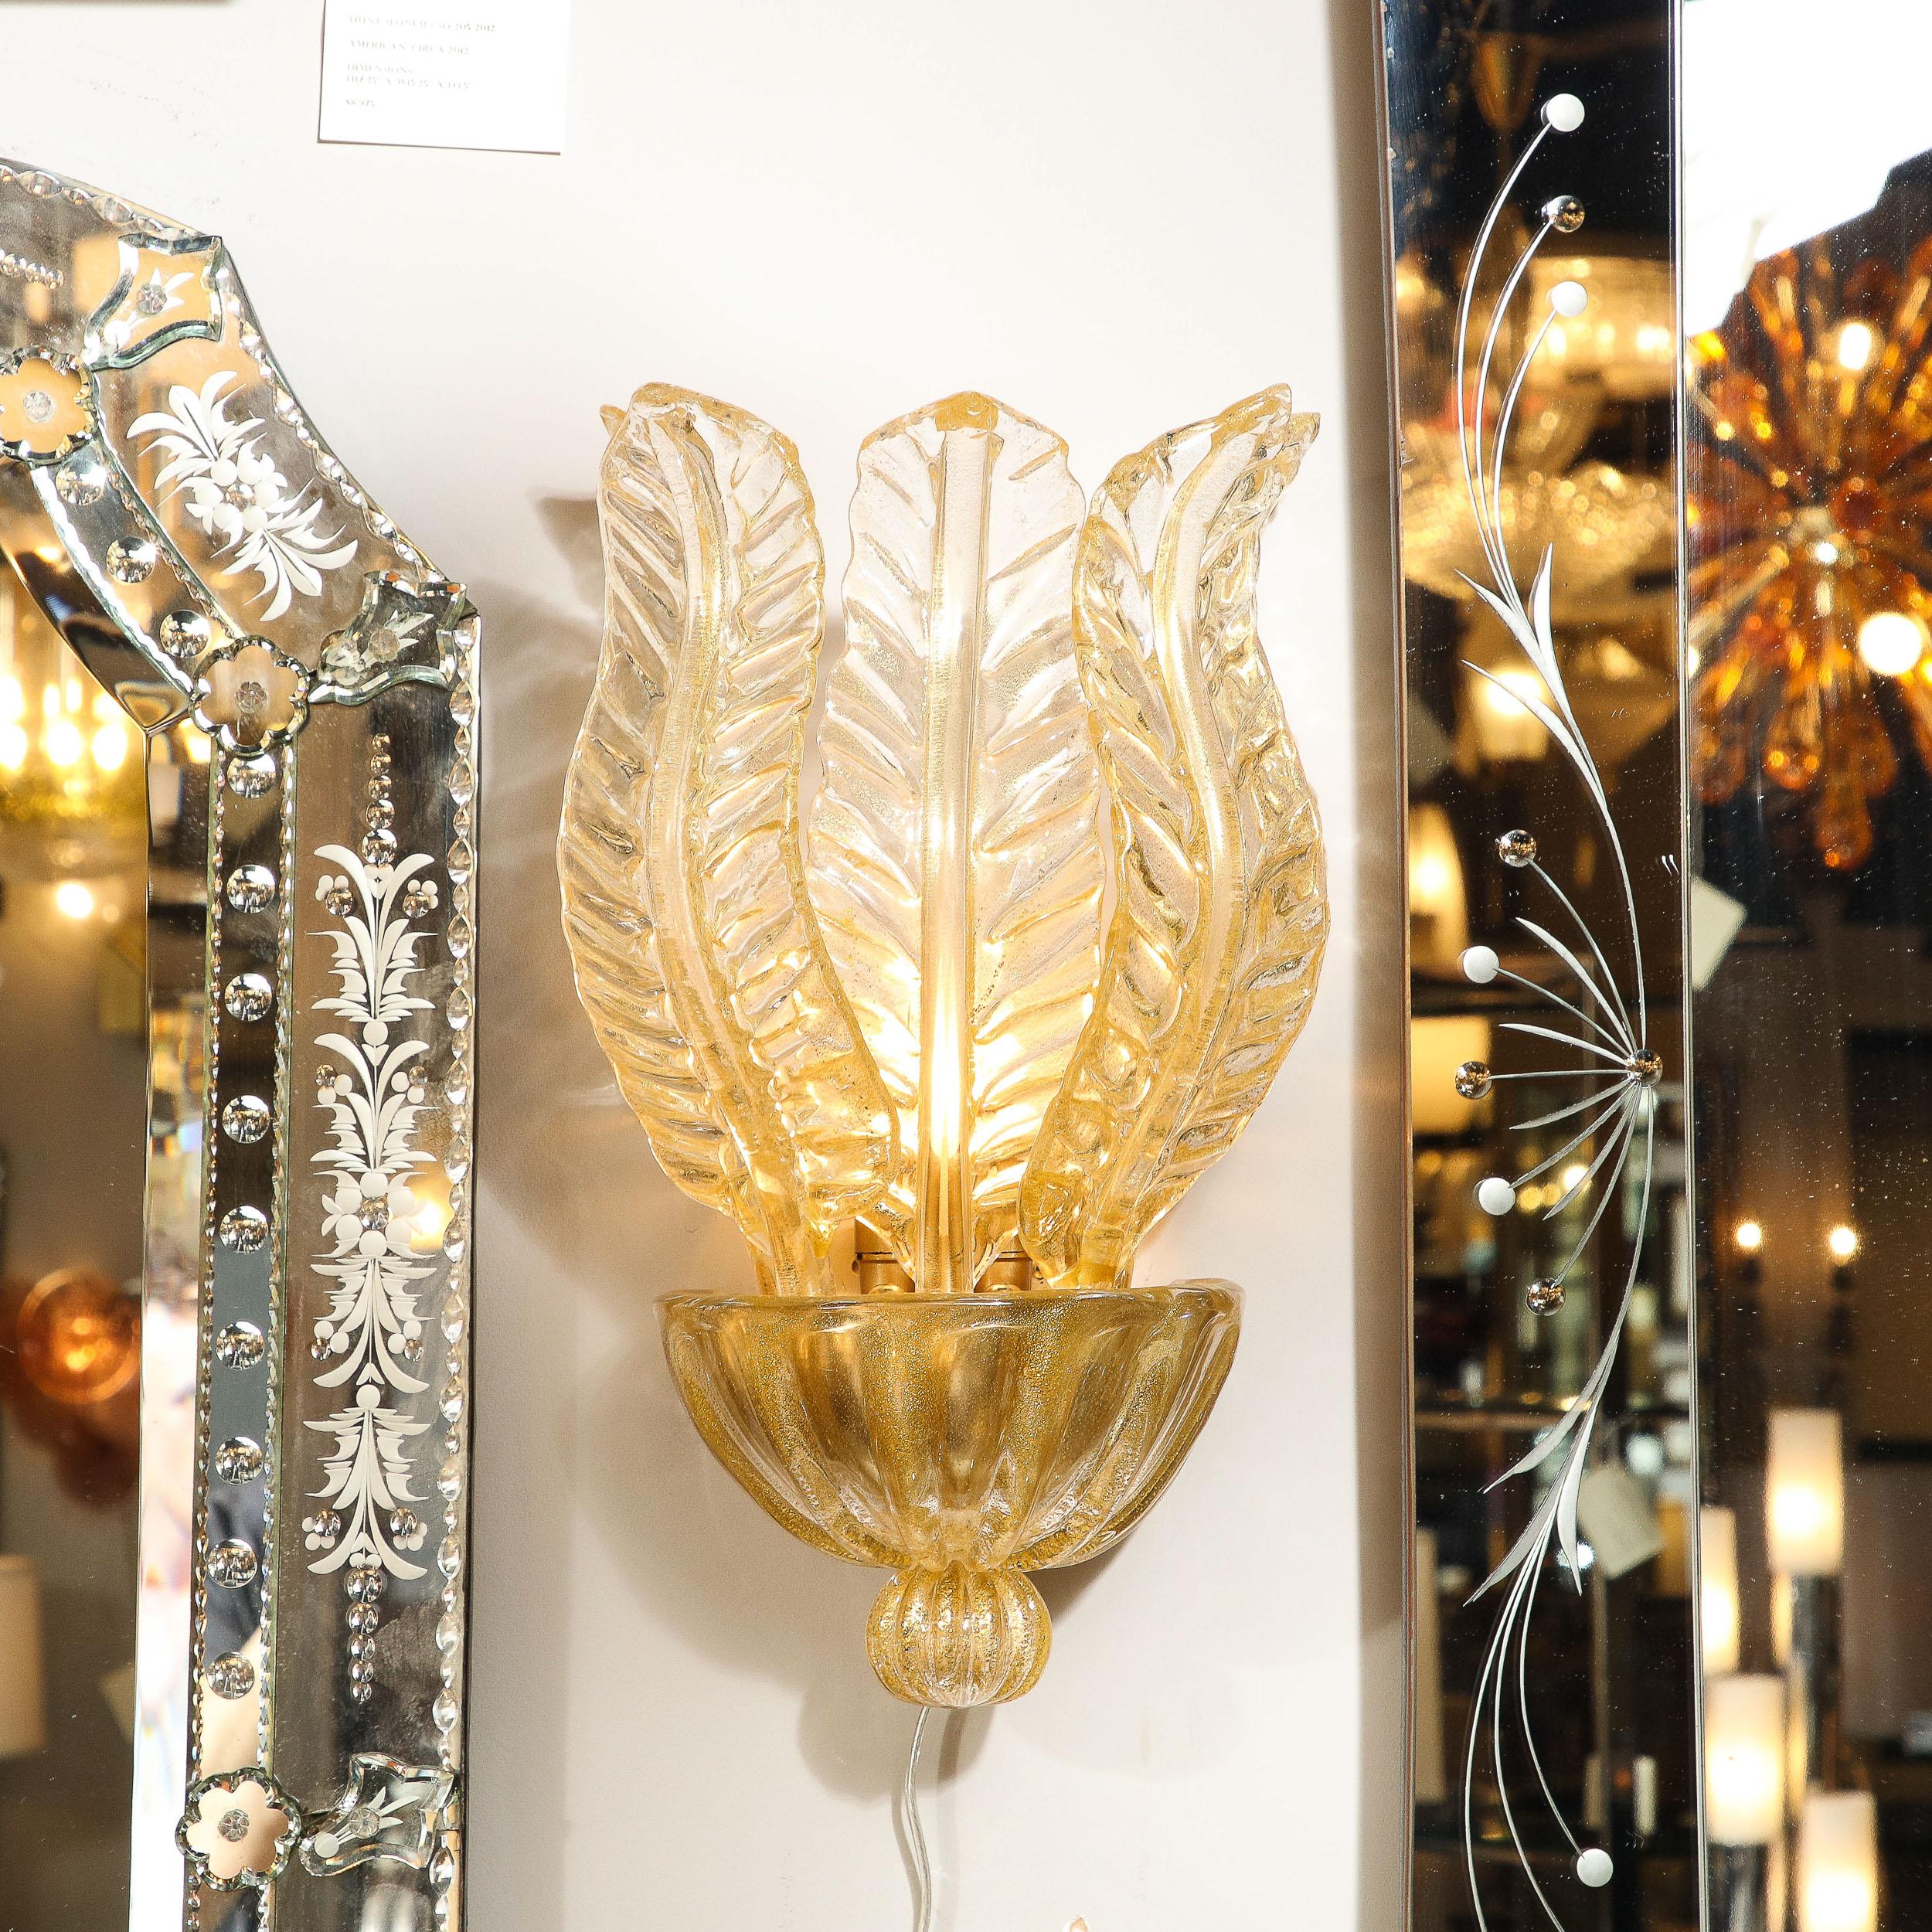 This stunning pair of modernist sconces were handblown in Murano, Italy- the island off the coast of Venice renowned for centuries for its superlative glass production- during the latter half of the 20th century. They feature domed and channeled